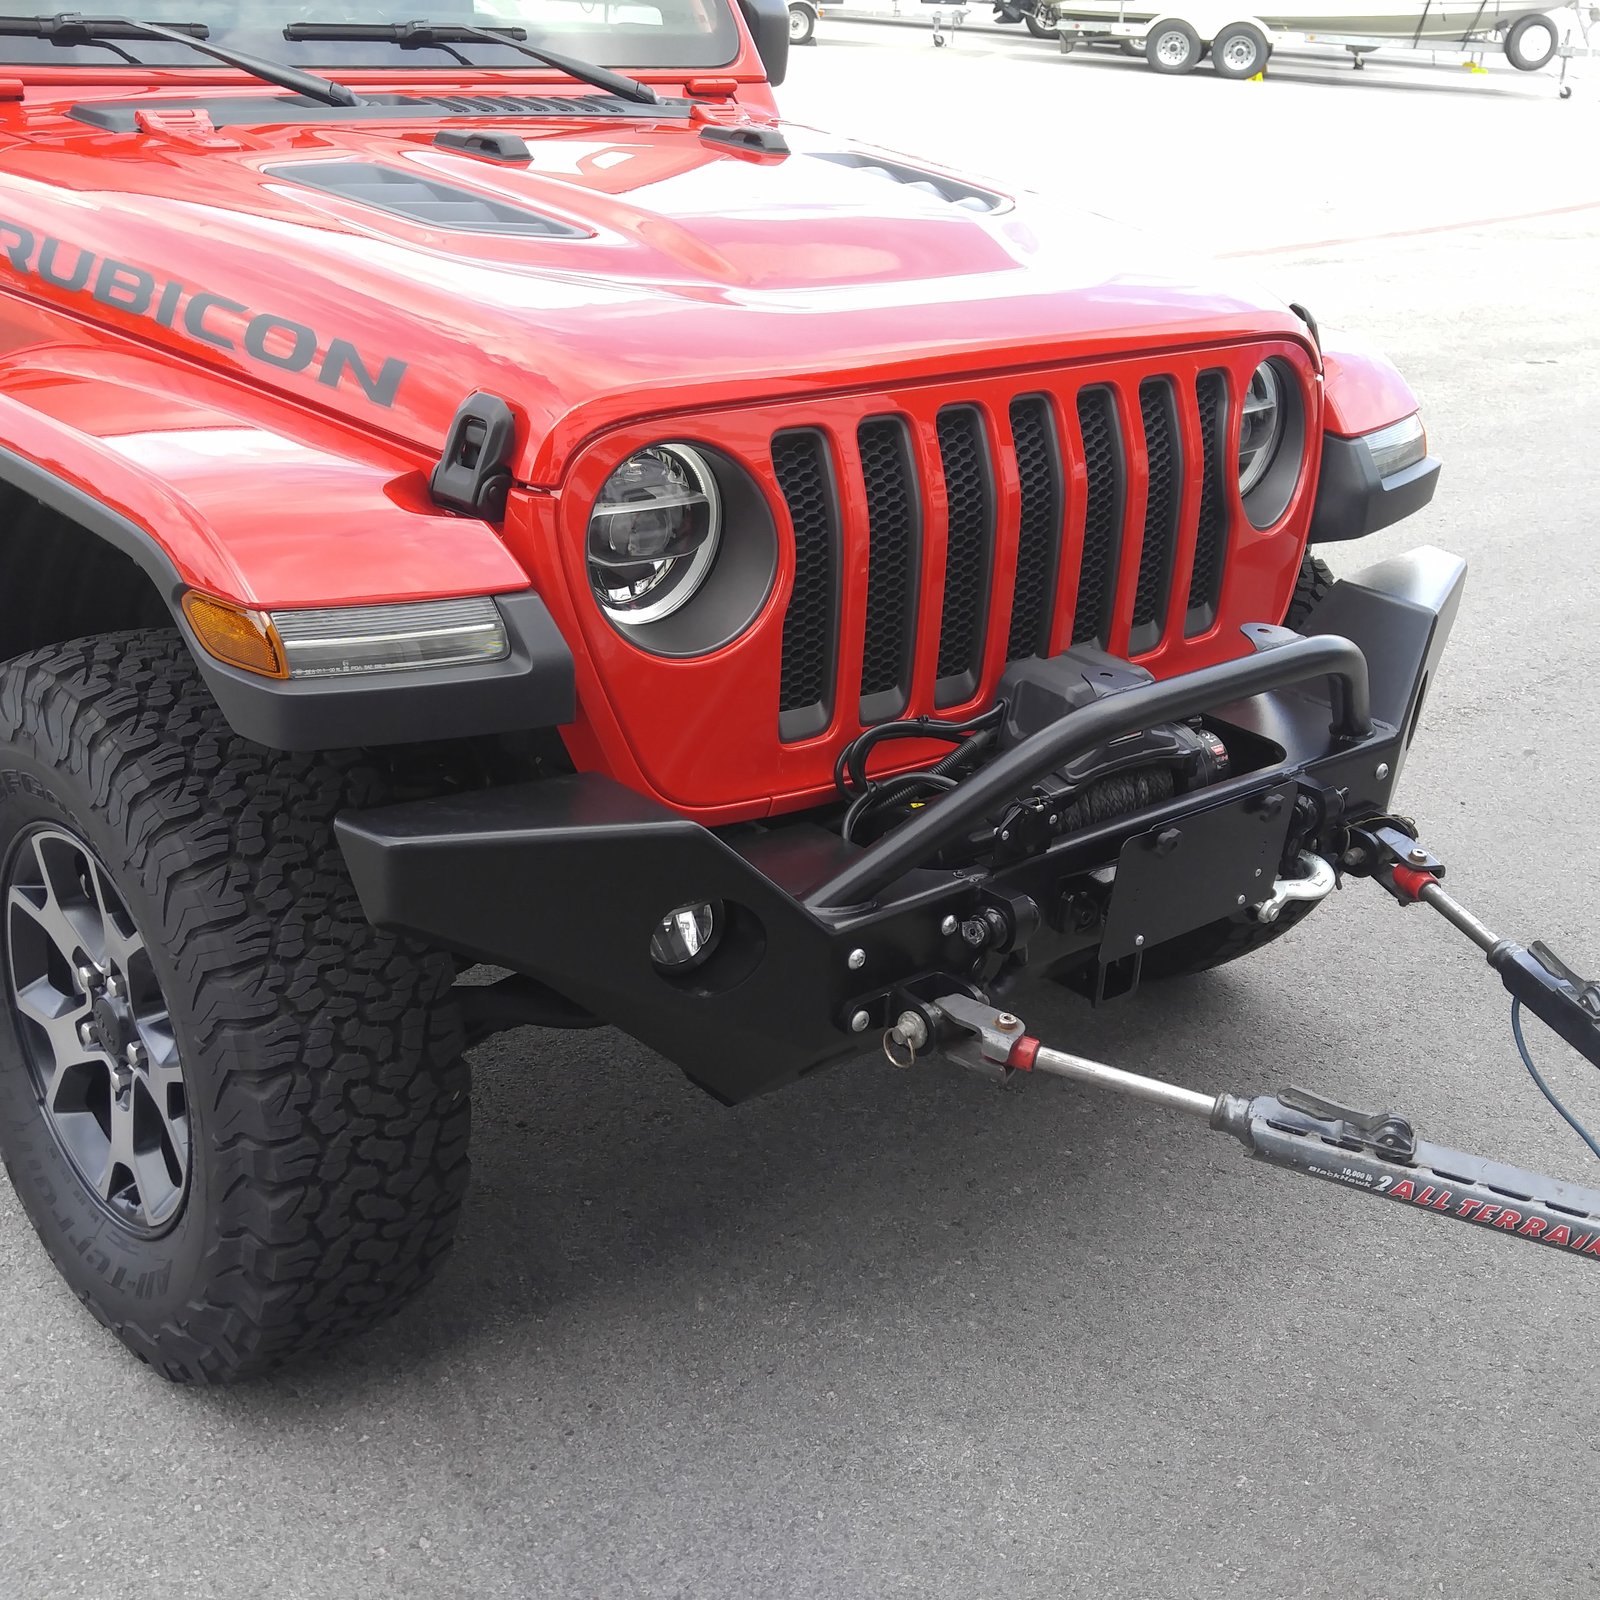 Roadmaster tow bars for Jeep Wrangler and Gladiator